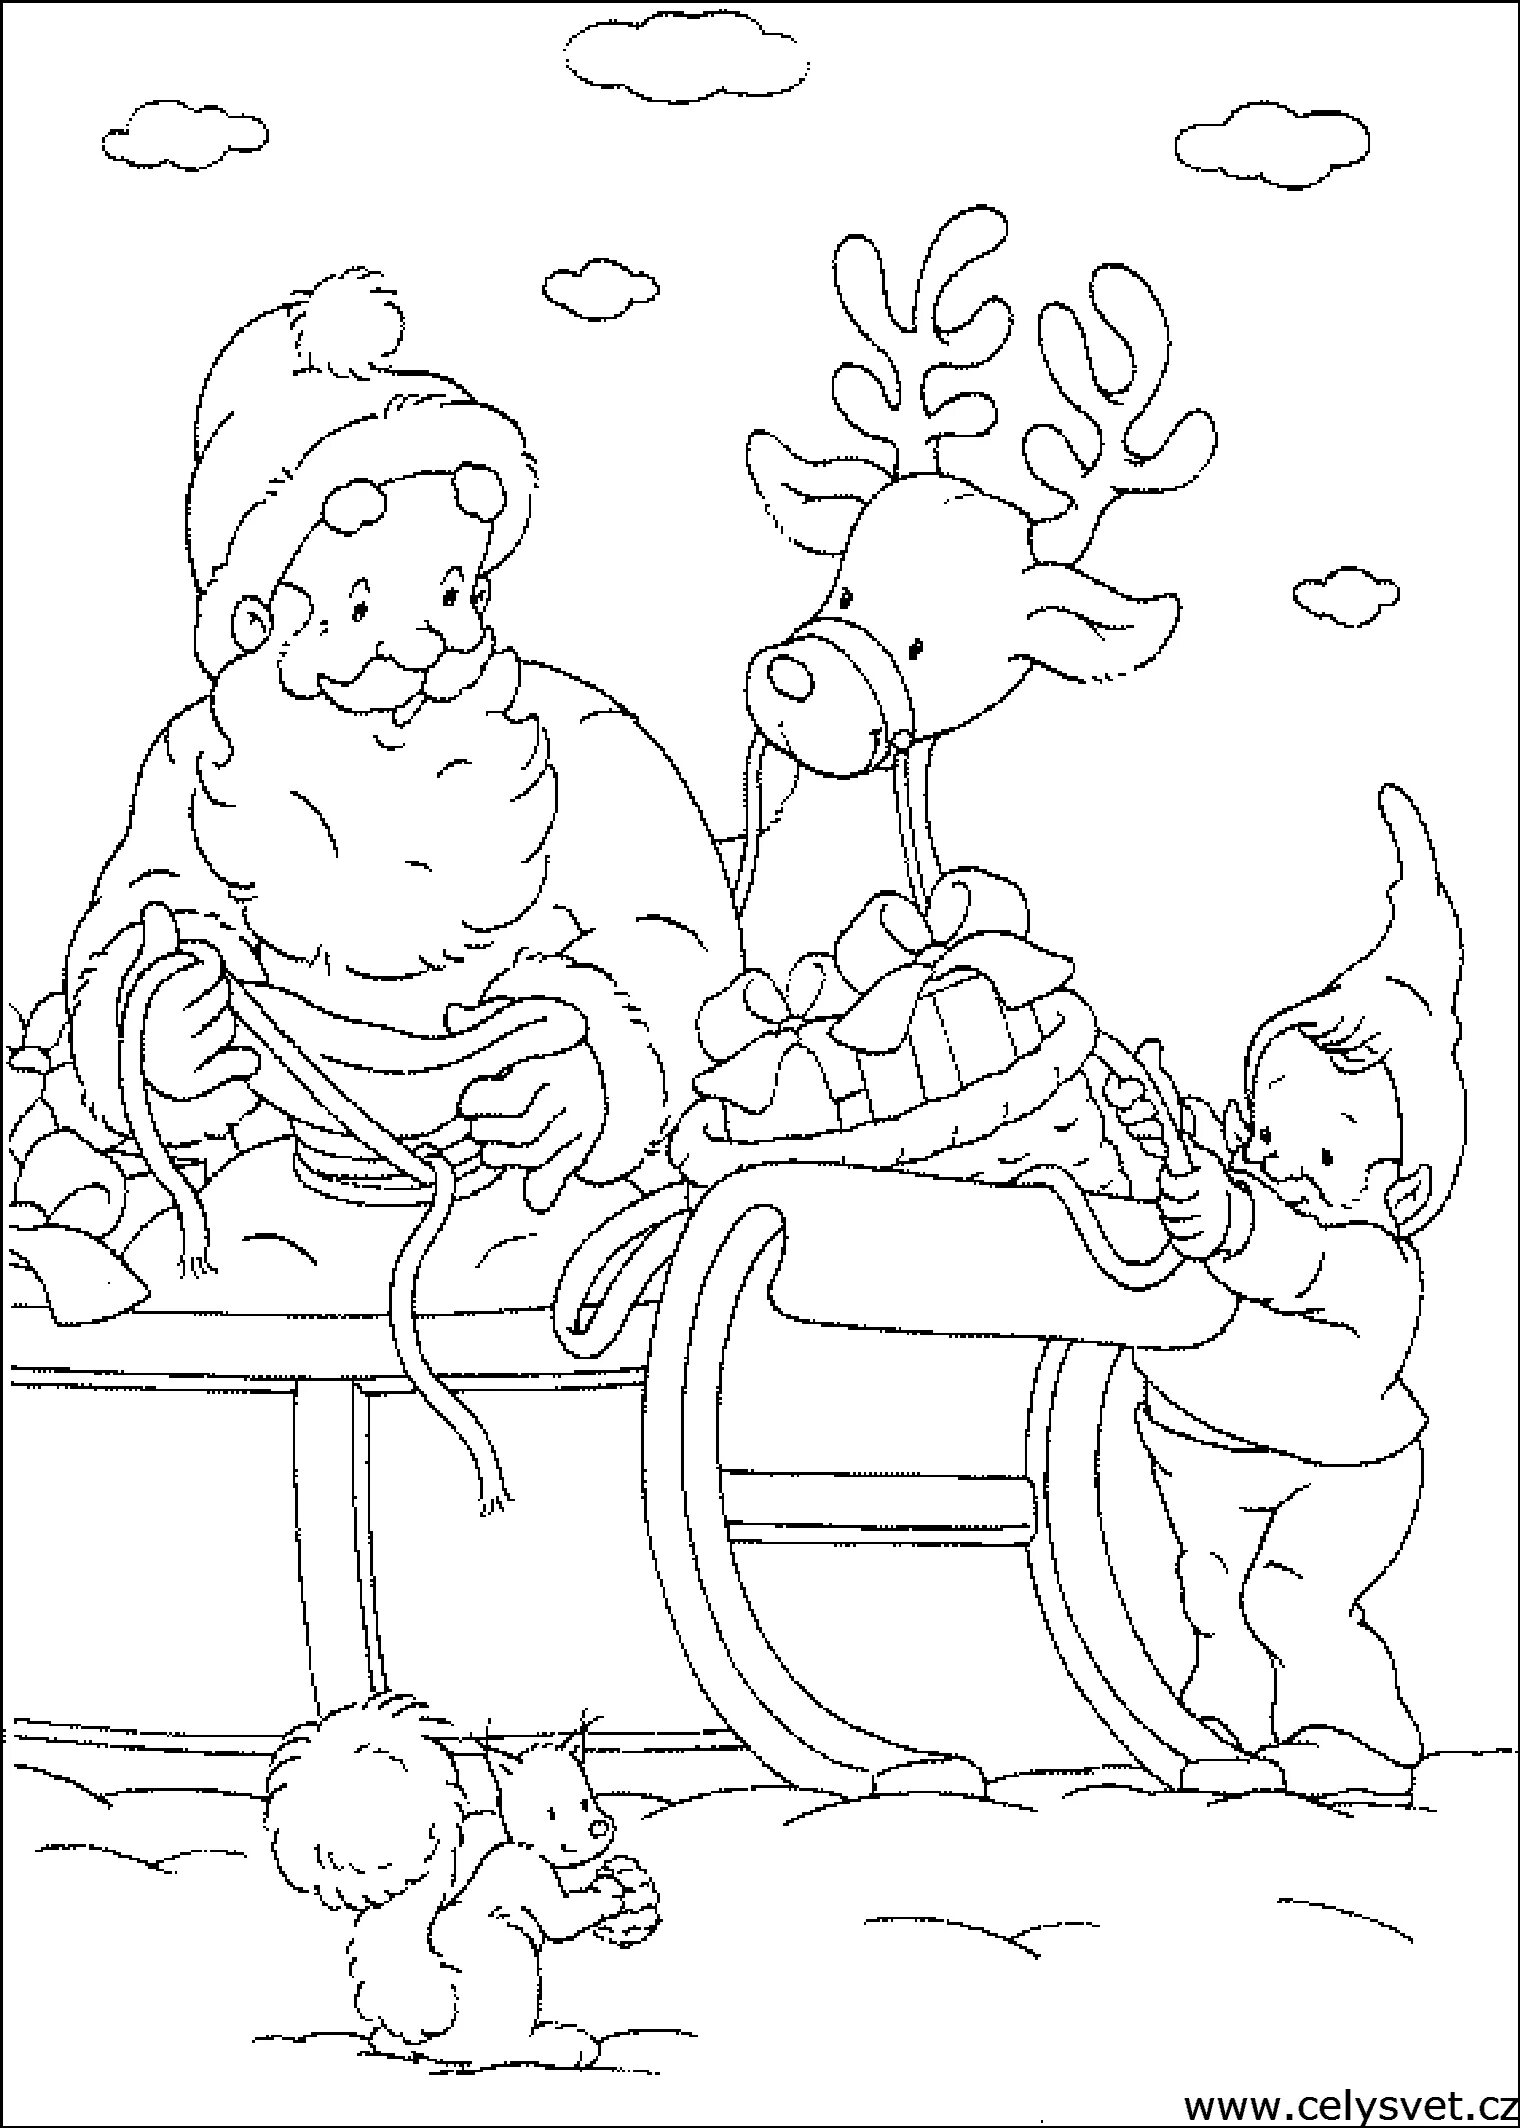 Sparkling Christmas story coloring book